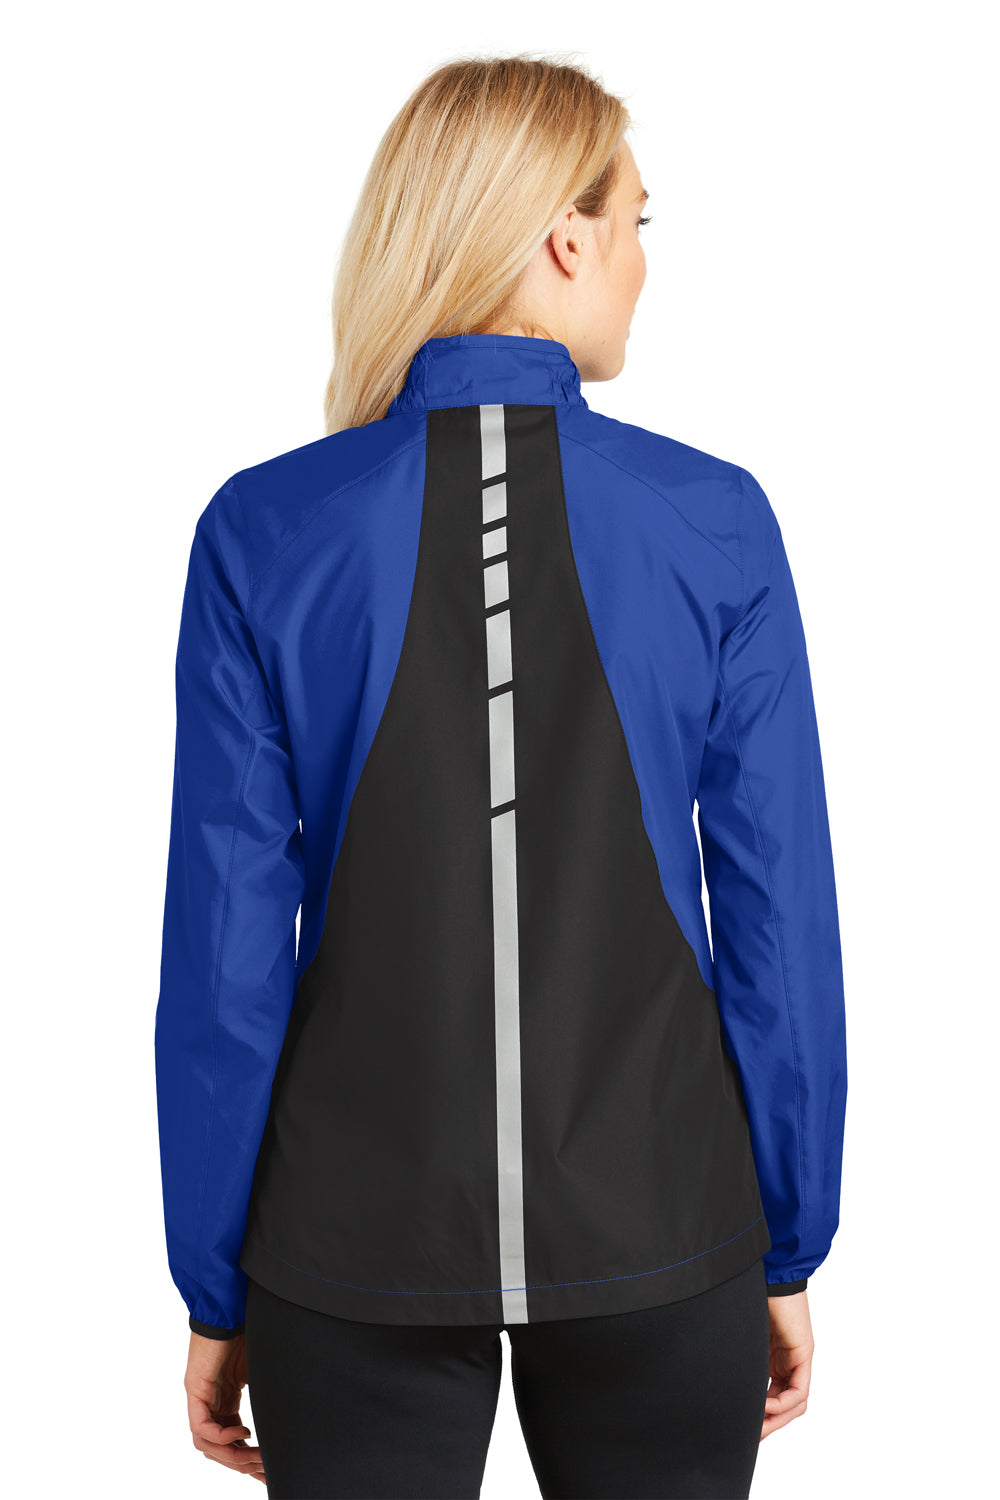 Port Authority L345 Womens Zephyr Reflective Hit Wind & Water Resistant Full Zip Jacket Royal Blue Back